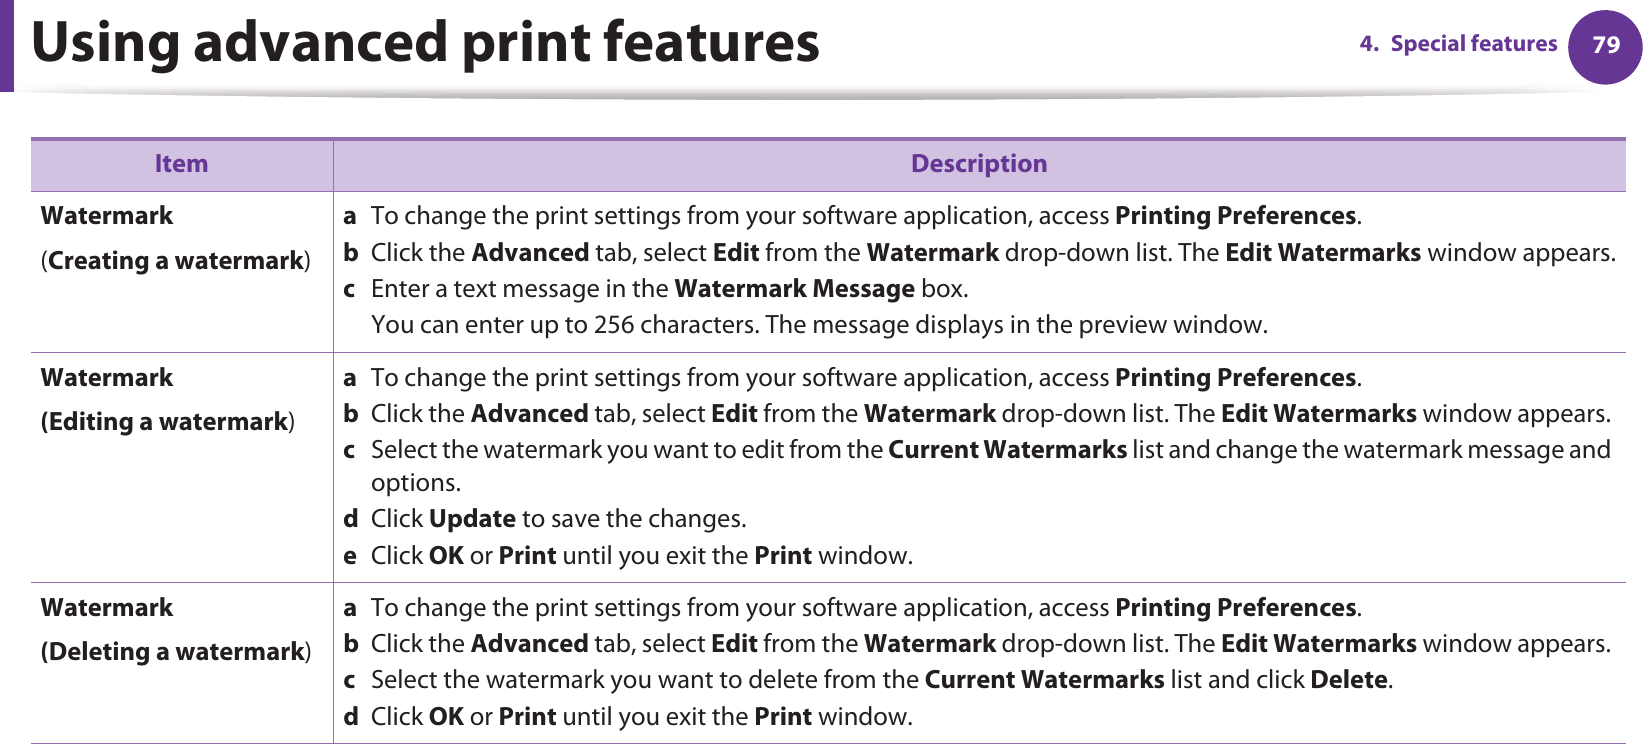 Using advanced print features 794. Special featuresWatermark(Creating a watermark)a  To change the print settings from your software application, access Printing Preferences.b  Click the Advanced tab, select Edit from the Watermark drop-down list. The Edit Watermarks window appears.c  Enter a text message in the Watermark Message box. You can enter up to 256 characters. The message displays in the preview window.Watermark(Editing a watermark)a  To change the print settings from your software application, access Printing Preferences.b  Click the Advanced tab, select Edit from the Watermark drop-down list. The Edit Watermarks window appears. c  Select the watermark you want to edit from the Current Watermarks list and change the watermark message and options. d  Click Update to save the changes.e  Click OK or Print until you exit the Print window. Watermark(Deleting a watermark)a  To change the print settings from your software application, access Printing Preferences.b  Click the Advanced tab, select Edit from the Watermark drop-down list. The Edit Watermarks window appears. c  Select the watermark you want to delete from the Current Watermarks list and click Delete. d  Click OK or Print until you exit the Print window.Item Description